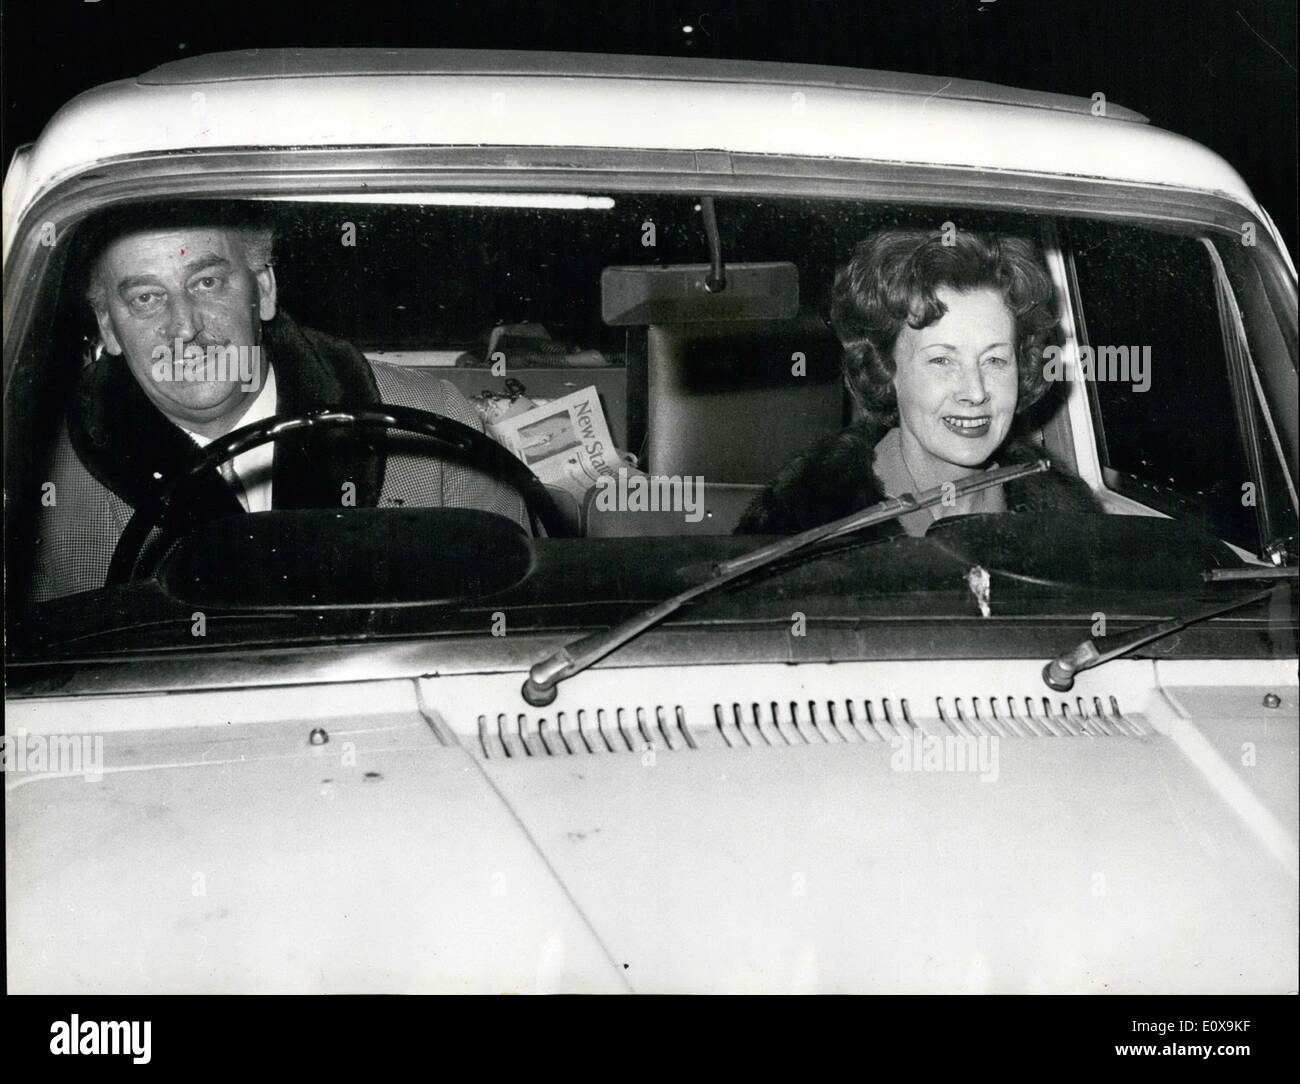 Dec. 12, 1965 - Mrs. Barbara castle is minister of transport : Mrs. Barbara castle, 54, has been appointed minister of transport in the prime minister's first cabinet reshuffle. Mrs. Castle, who does not dirv, is the first woman transport minister, and takes the place of Mr. Tom Fraser. Photo shows Mrs .Barbara Castle is driven from the house of commons last night by her husband, ted. Stock Photo